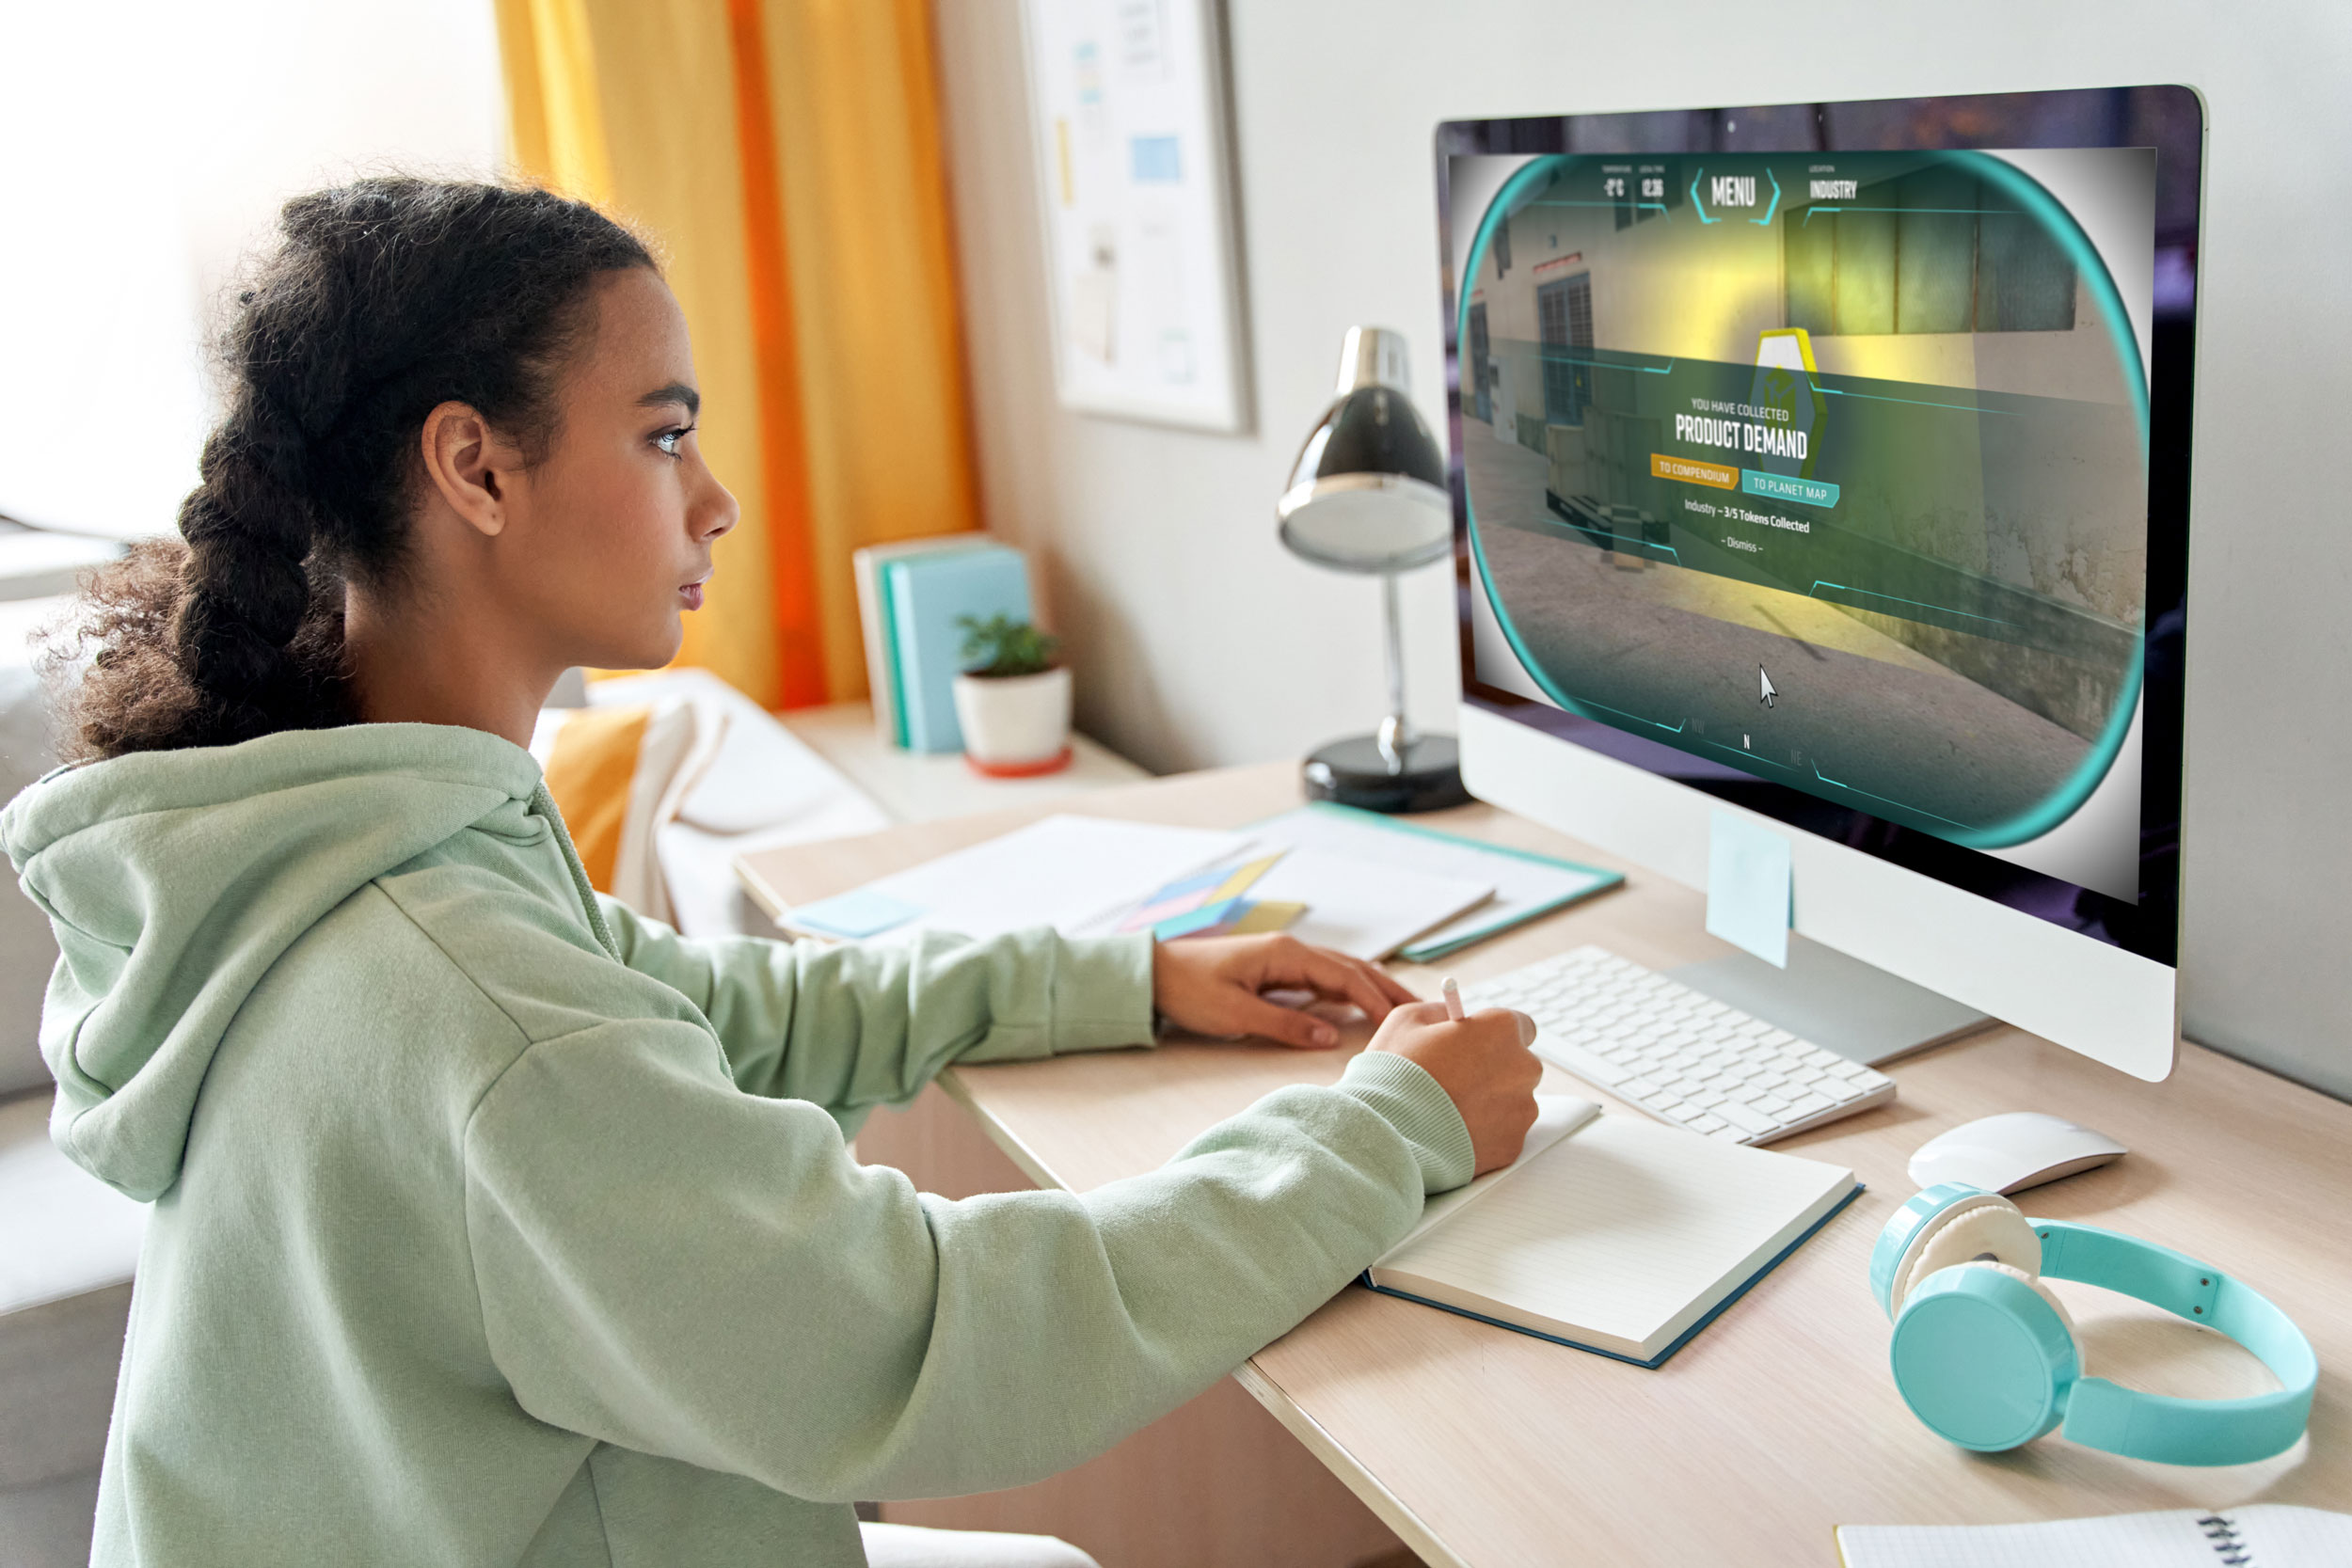 Girl playing Siemens Decarbonisation game on a computer